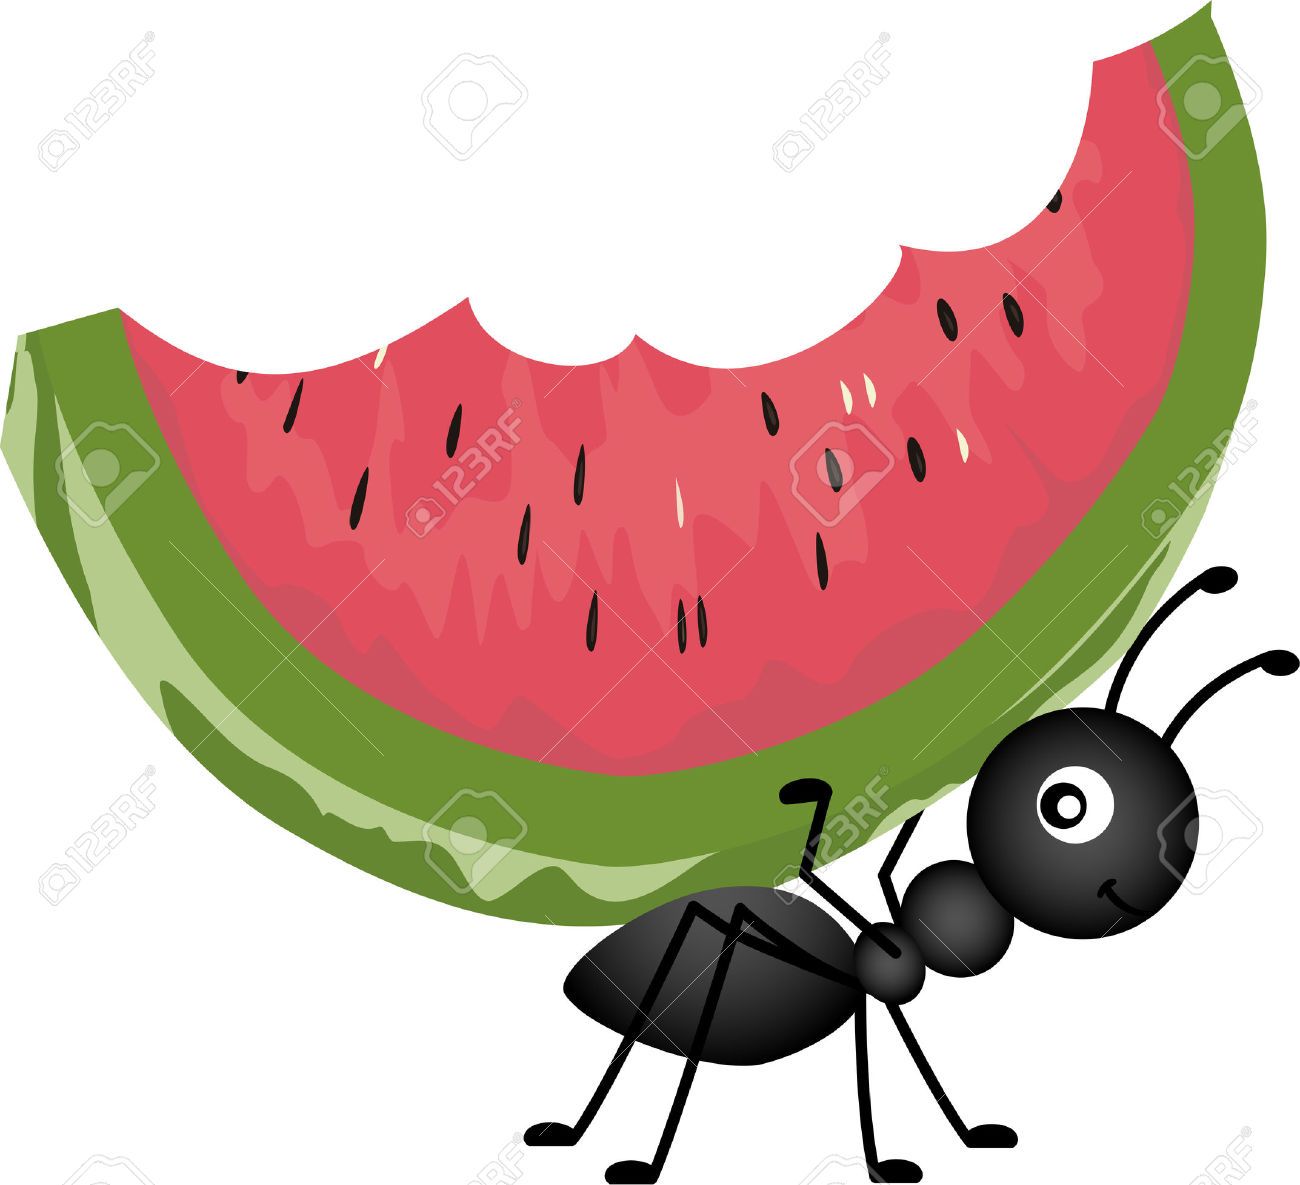 picnic food : Ant Carrying Watermelon Illustration.